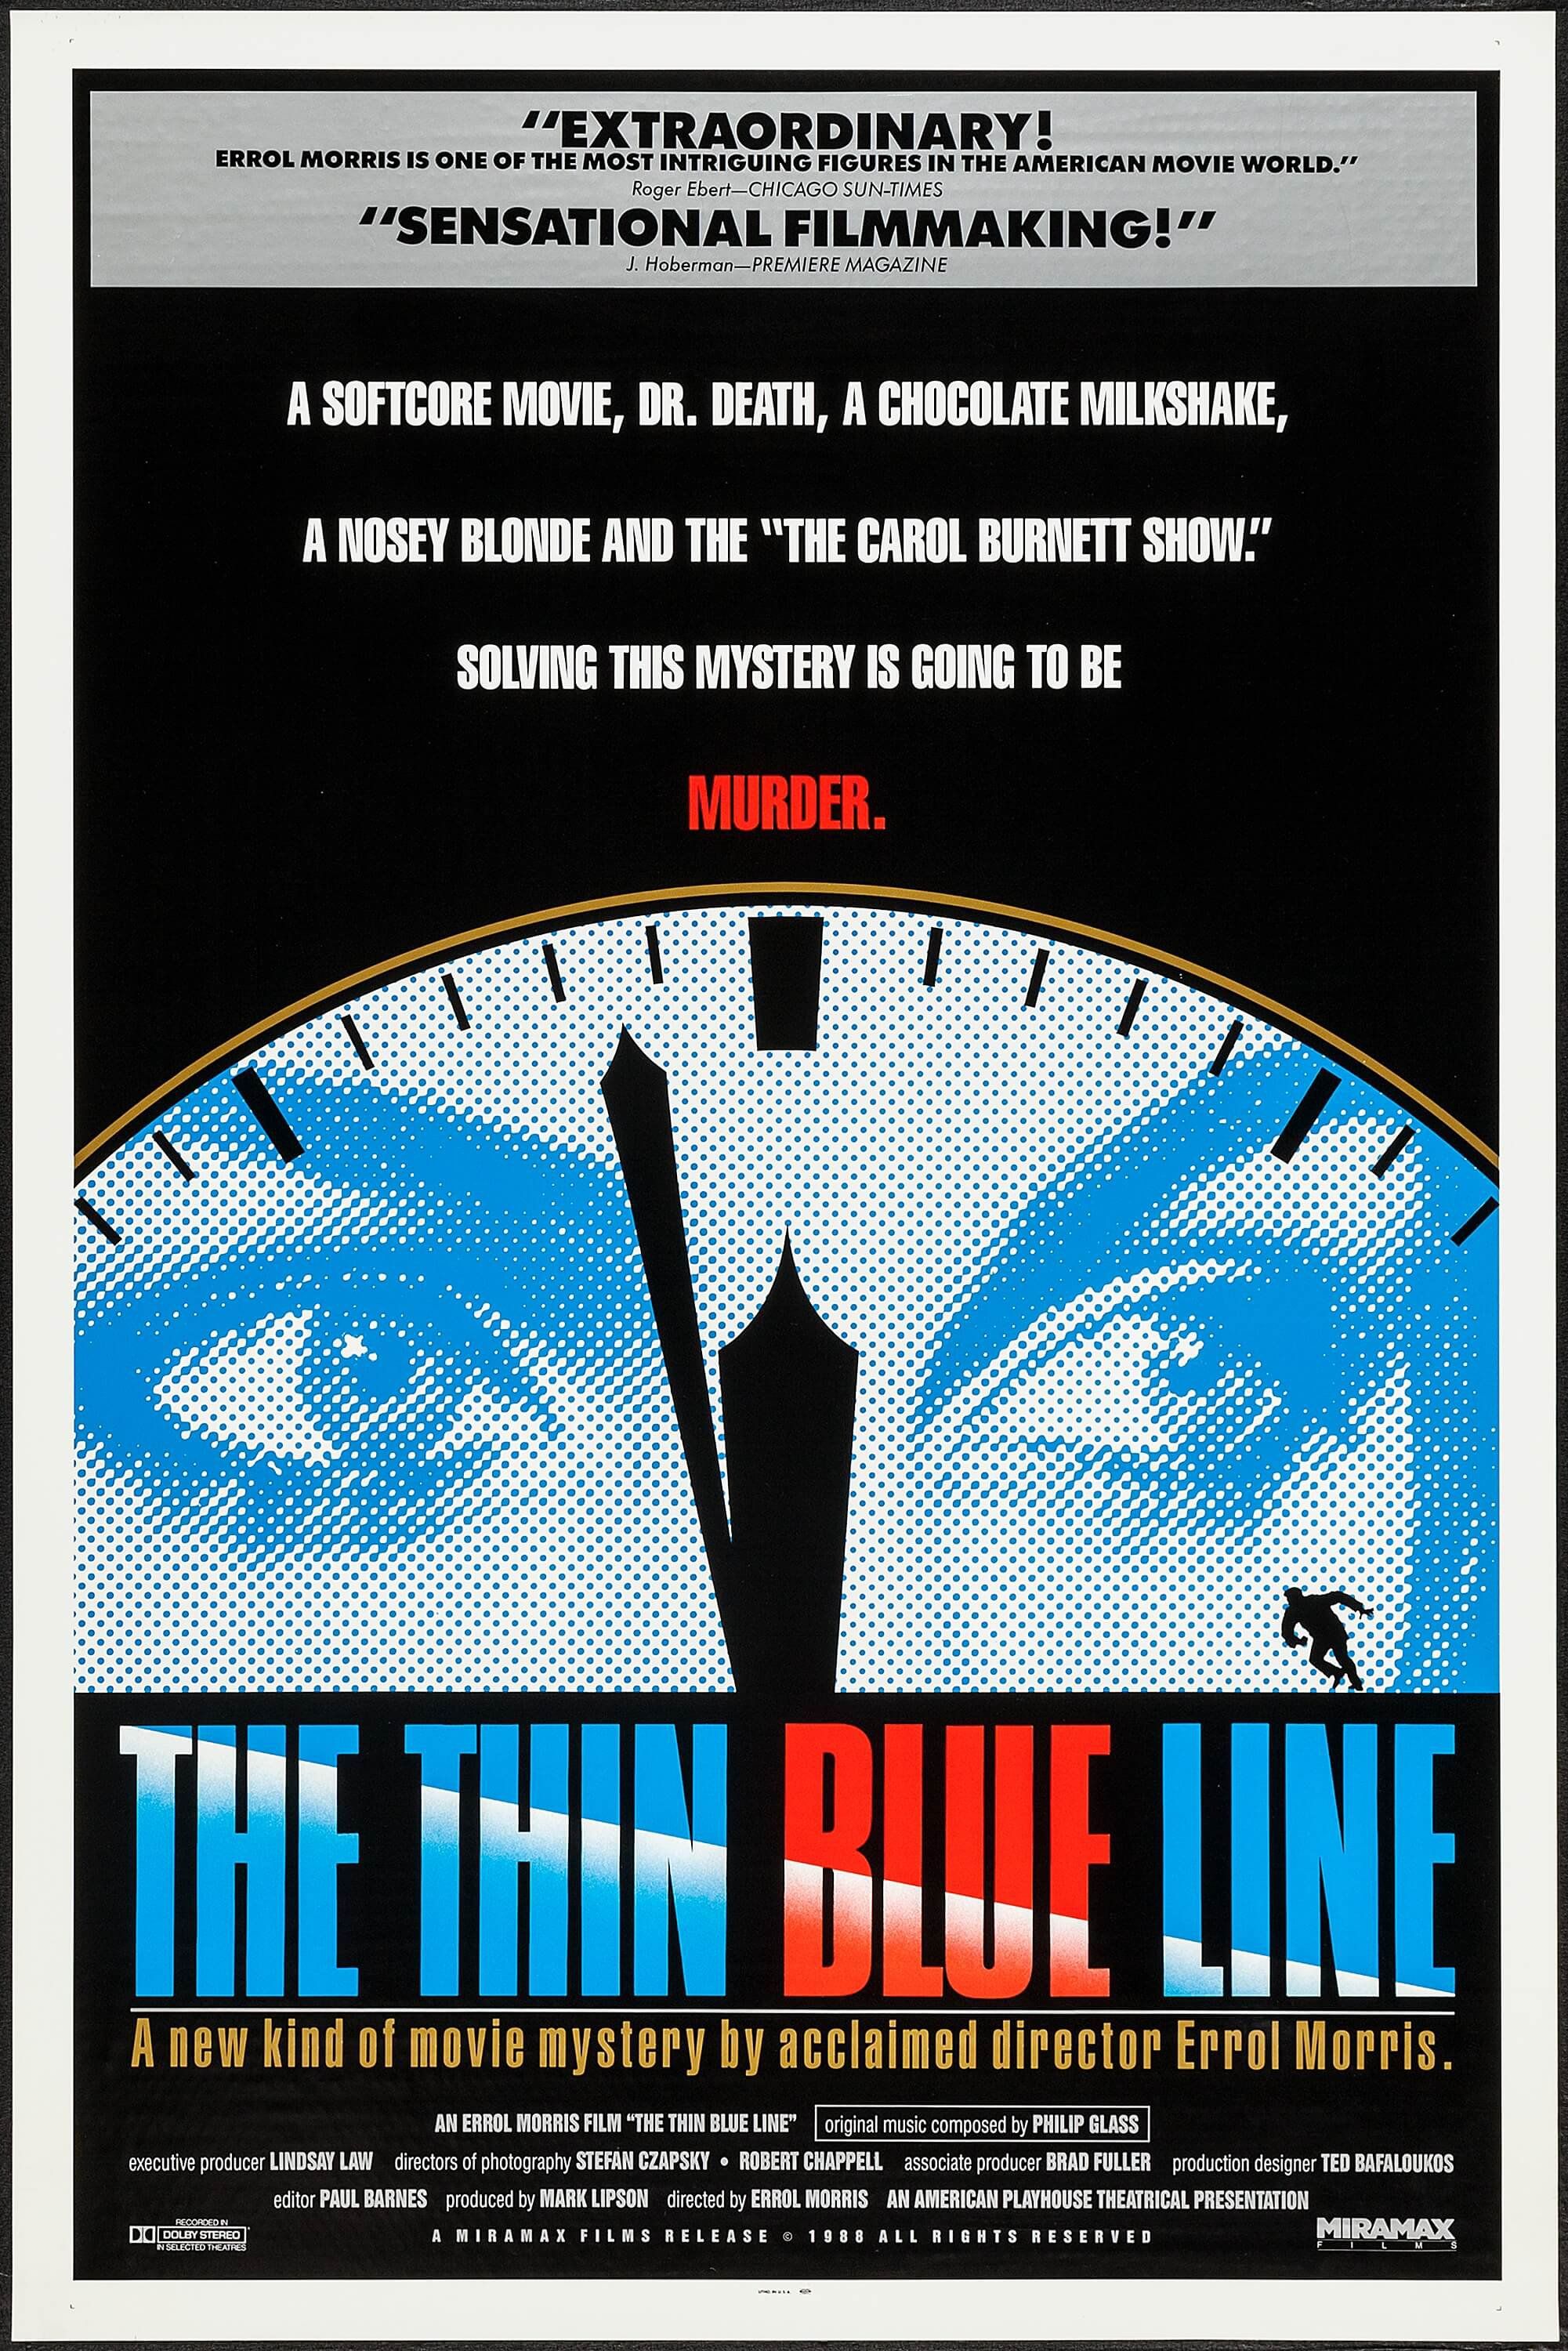 A woman's face projected o a clock on the movie poster for The Thin Blue Line